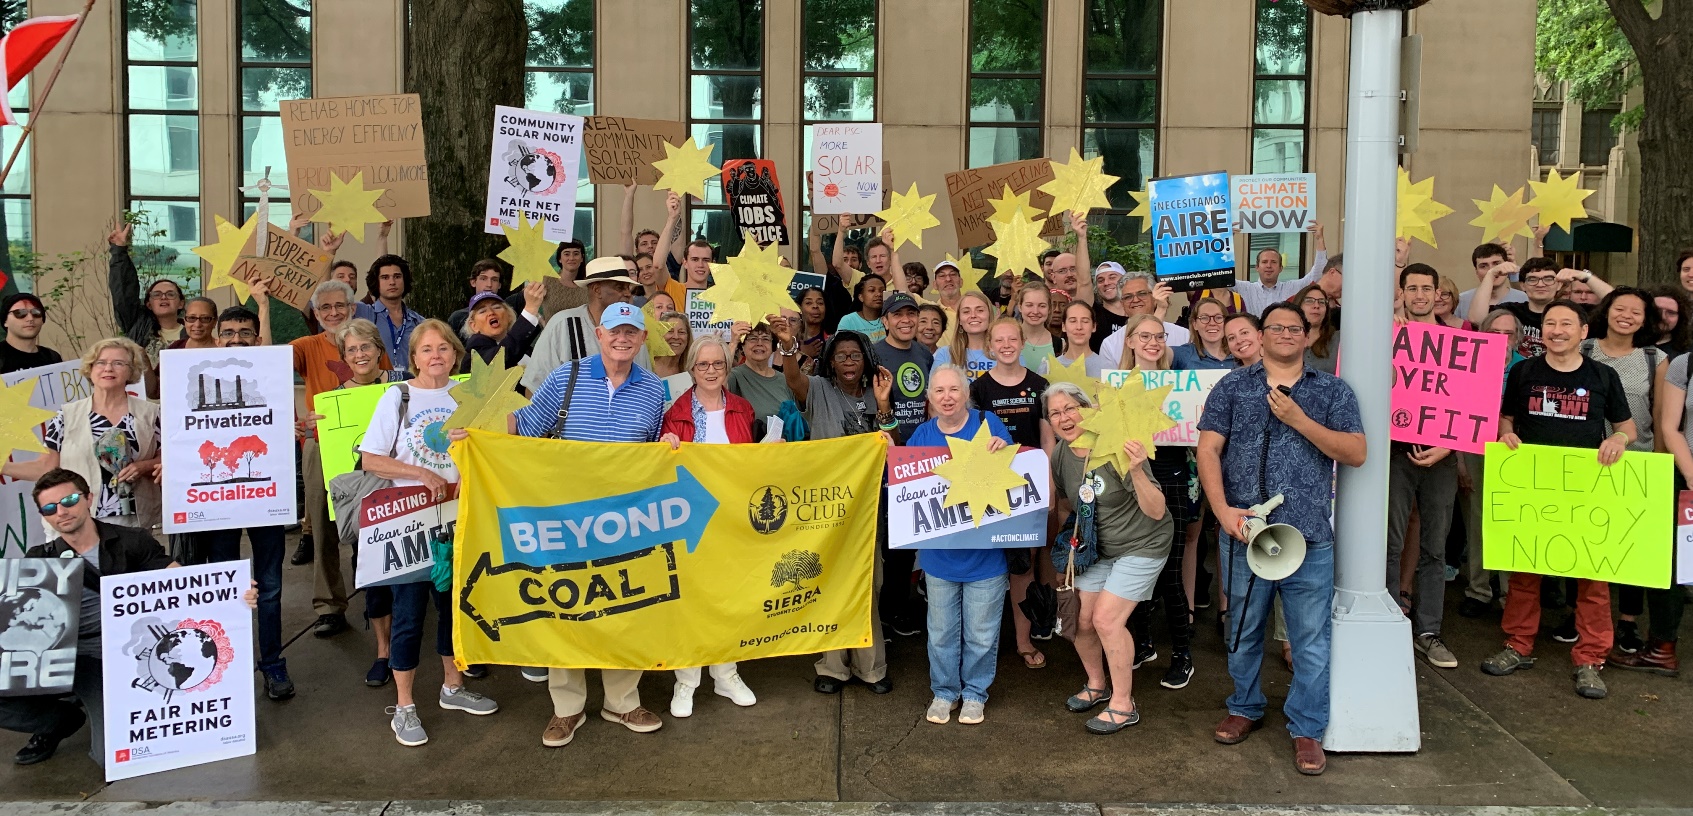 2019 Was a Big Year for Moving Beyond Coal | Sierra Club